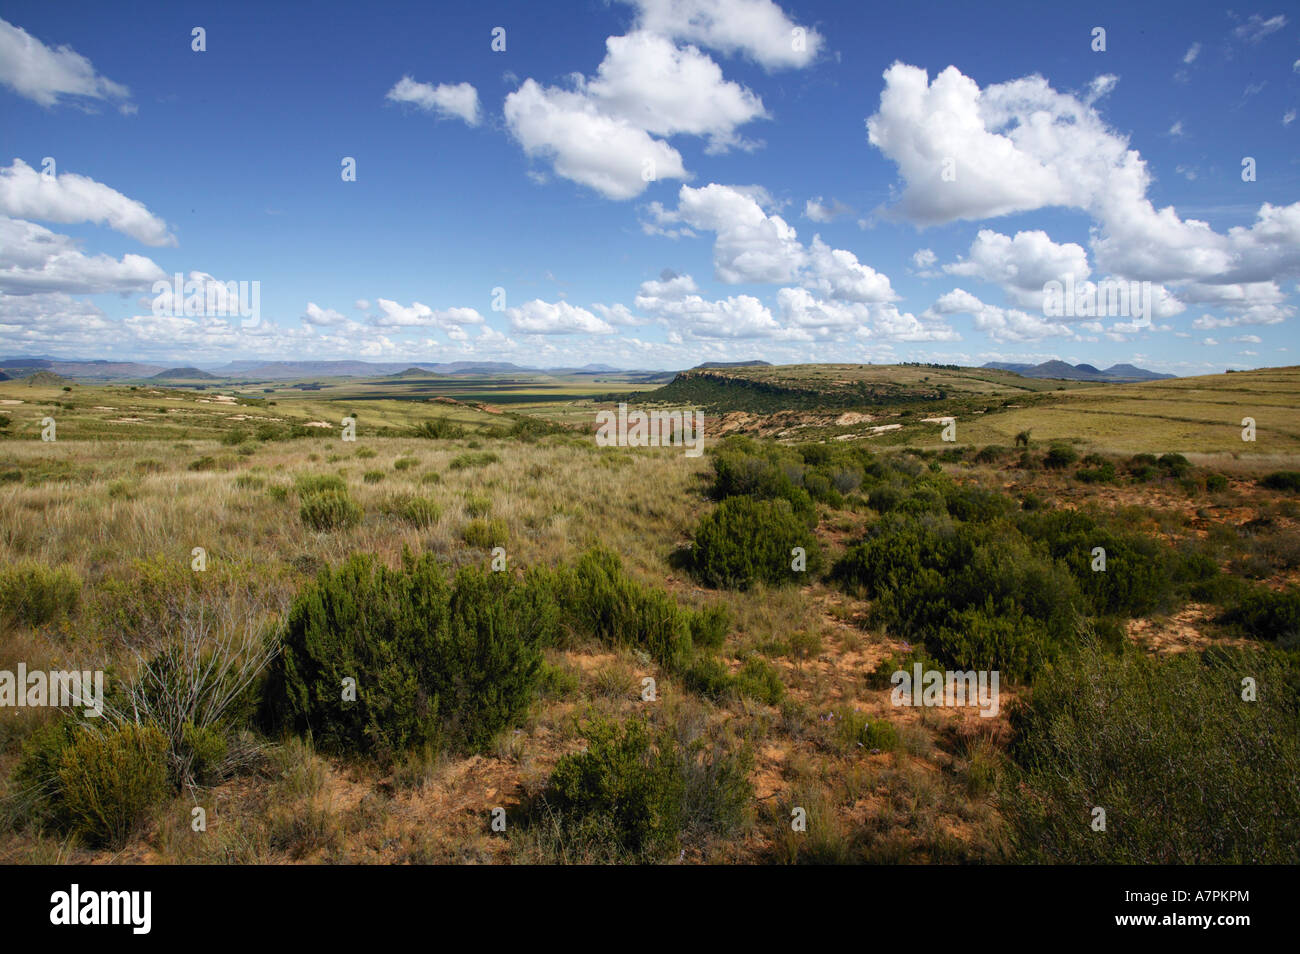 Rural countryside with the Maluti Mountains in the far distance Ladybrand South Africa Stock Photo